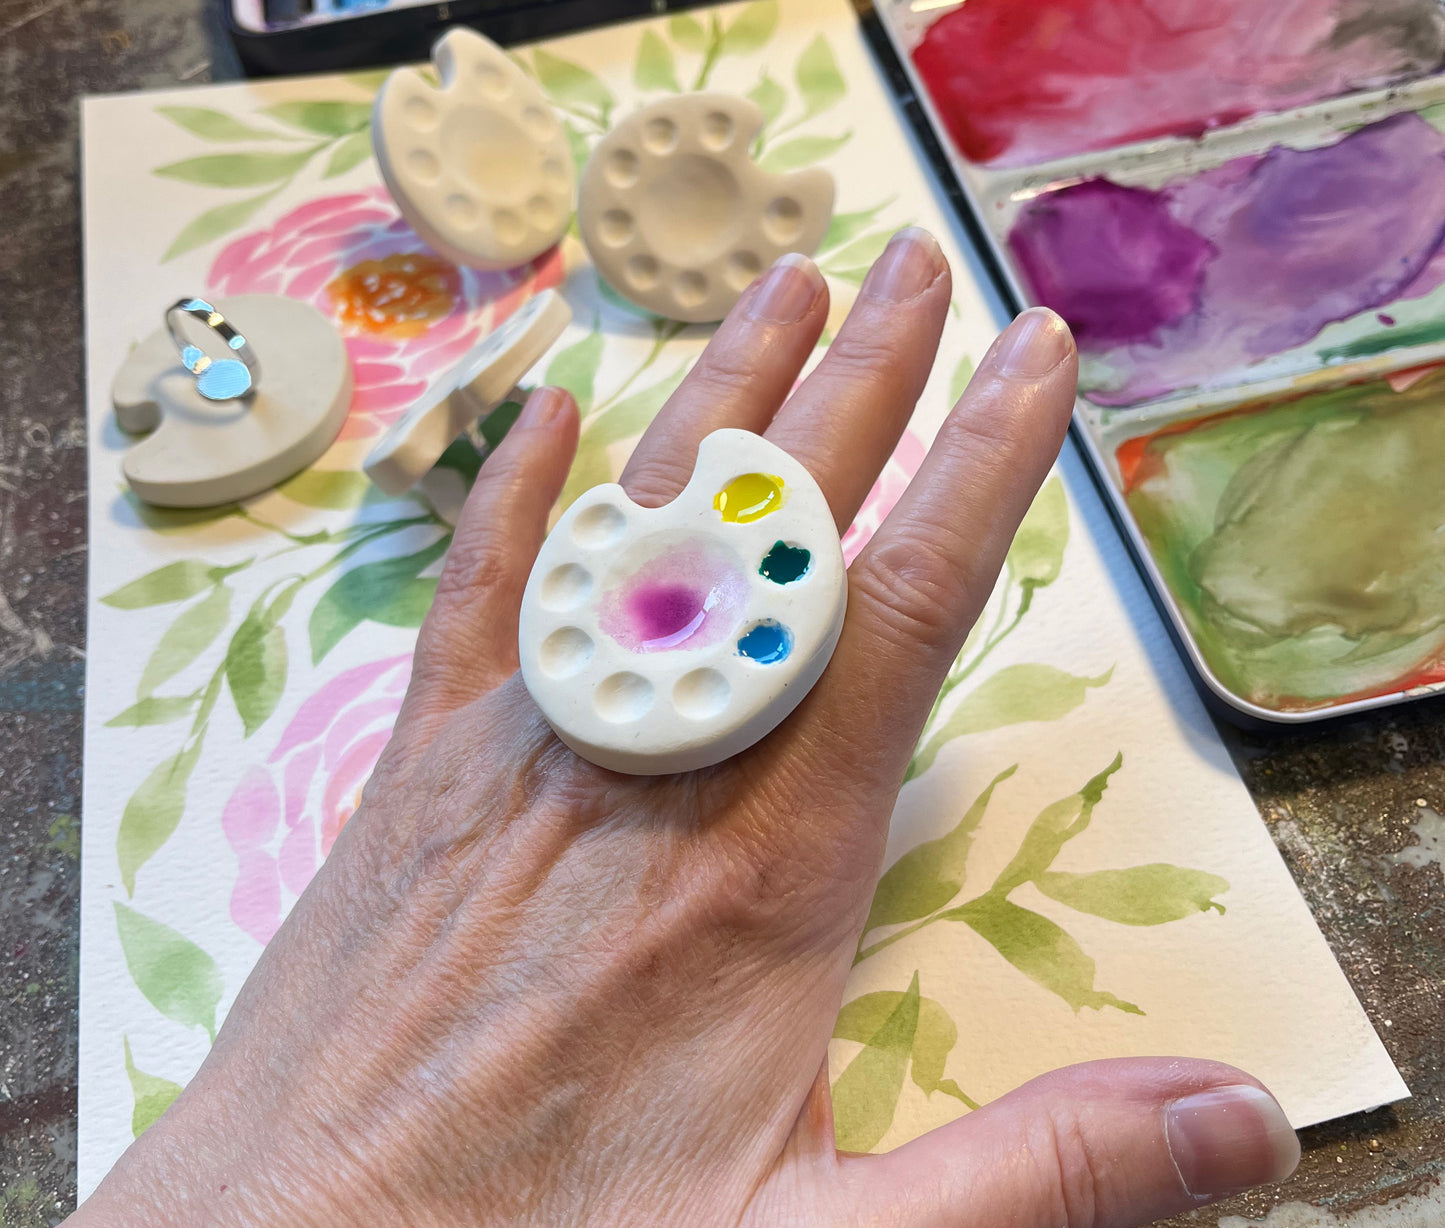 Paint palette watercolor ring / travel art supplies / artist jewelry / whimsical art rings / Art gift / tiny ring palette, gifts for artists